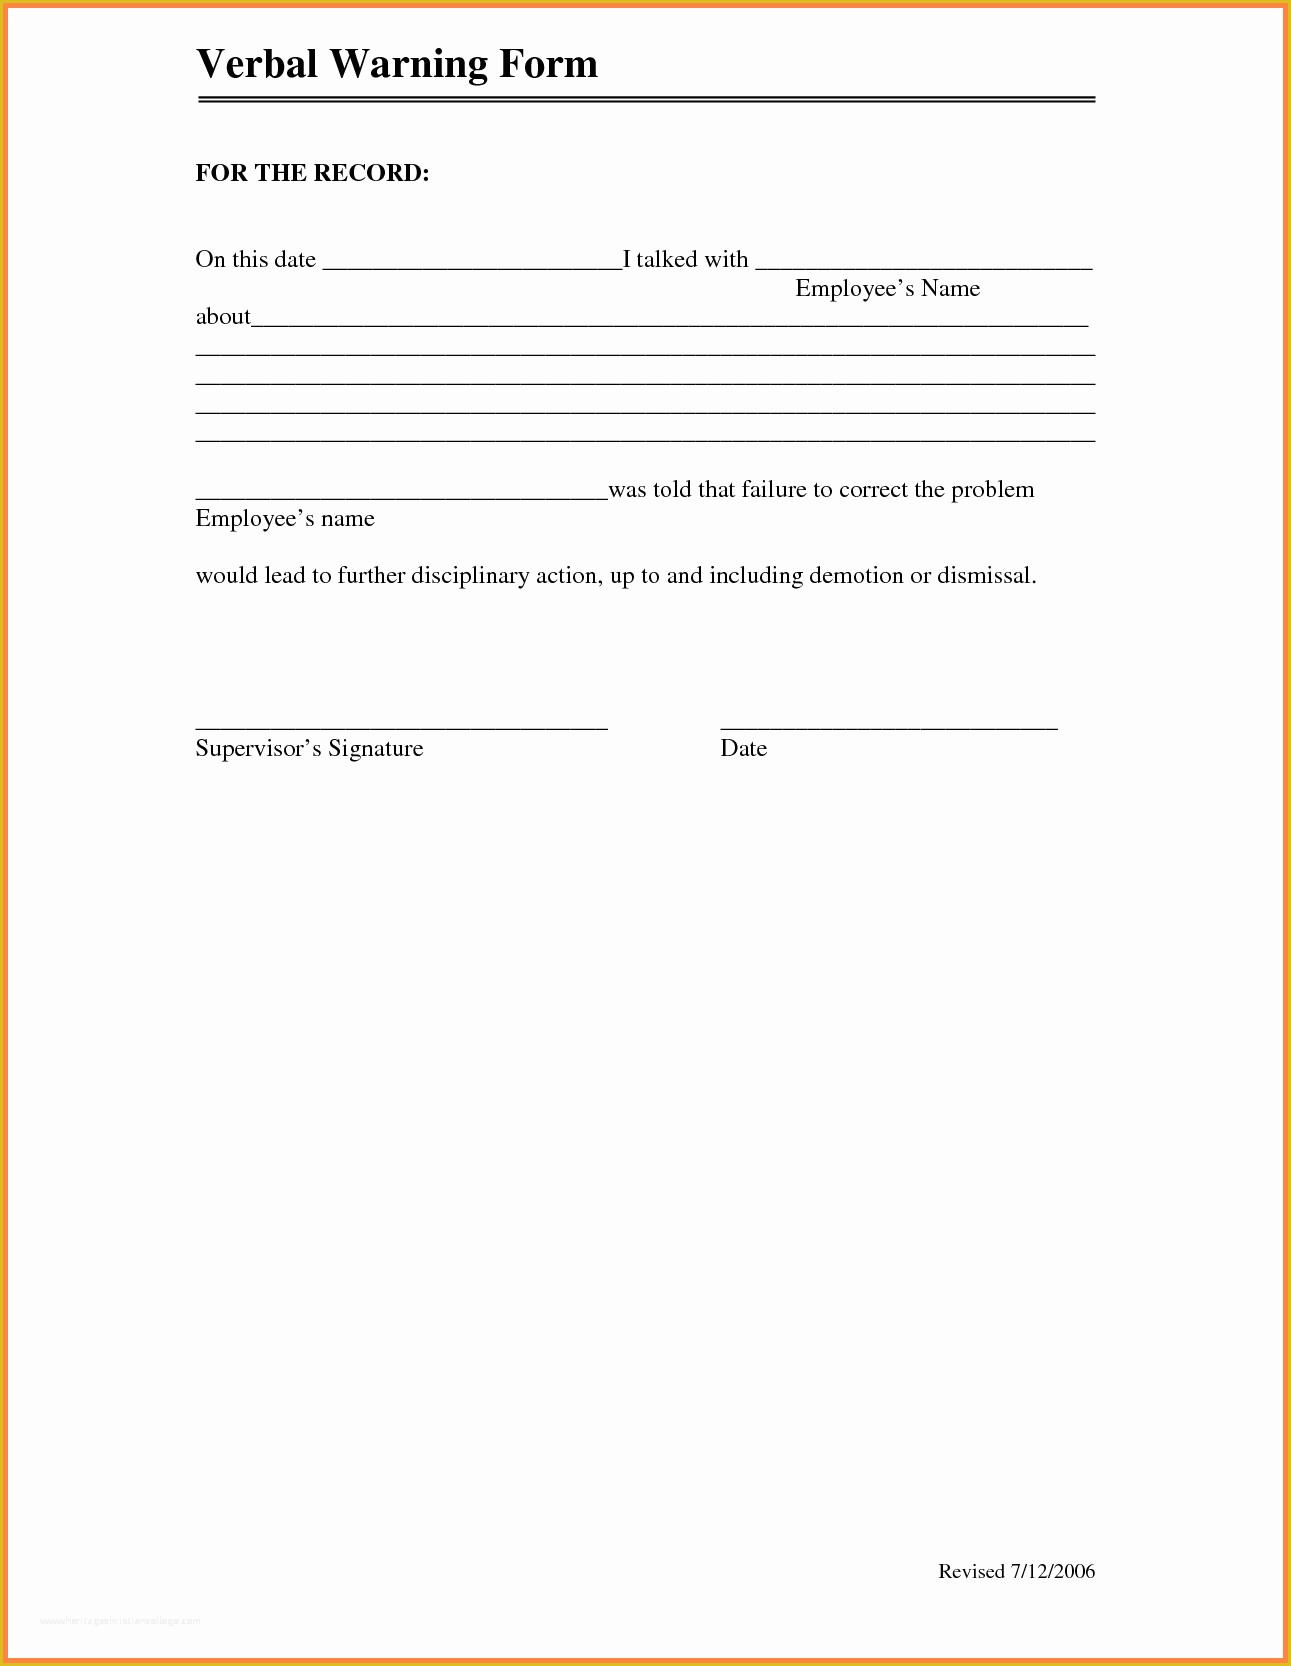 Free Counseling forms Templates Of Employee Counseling form